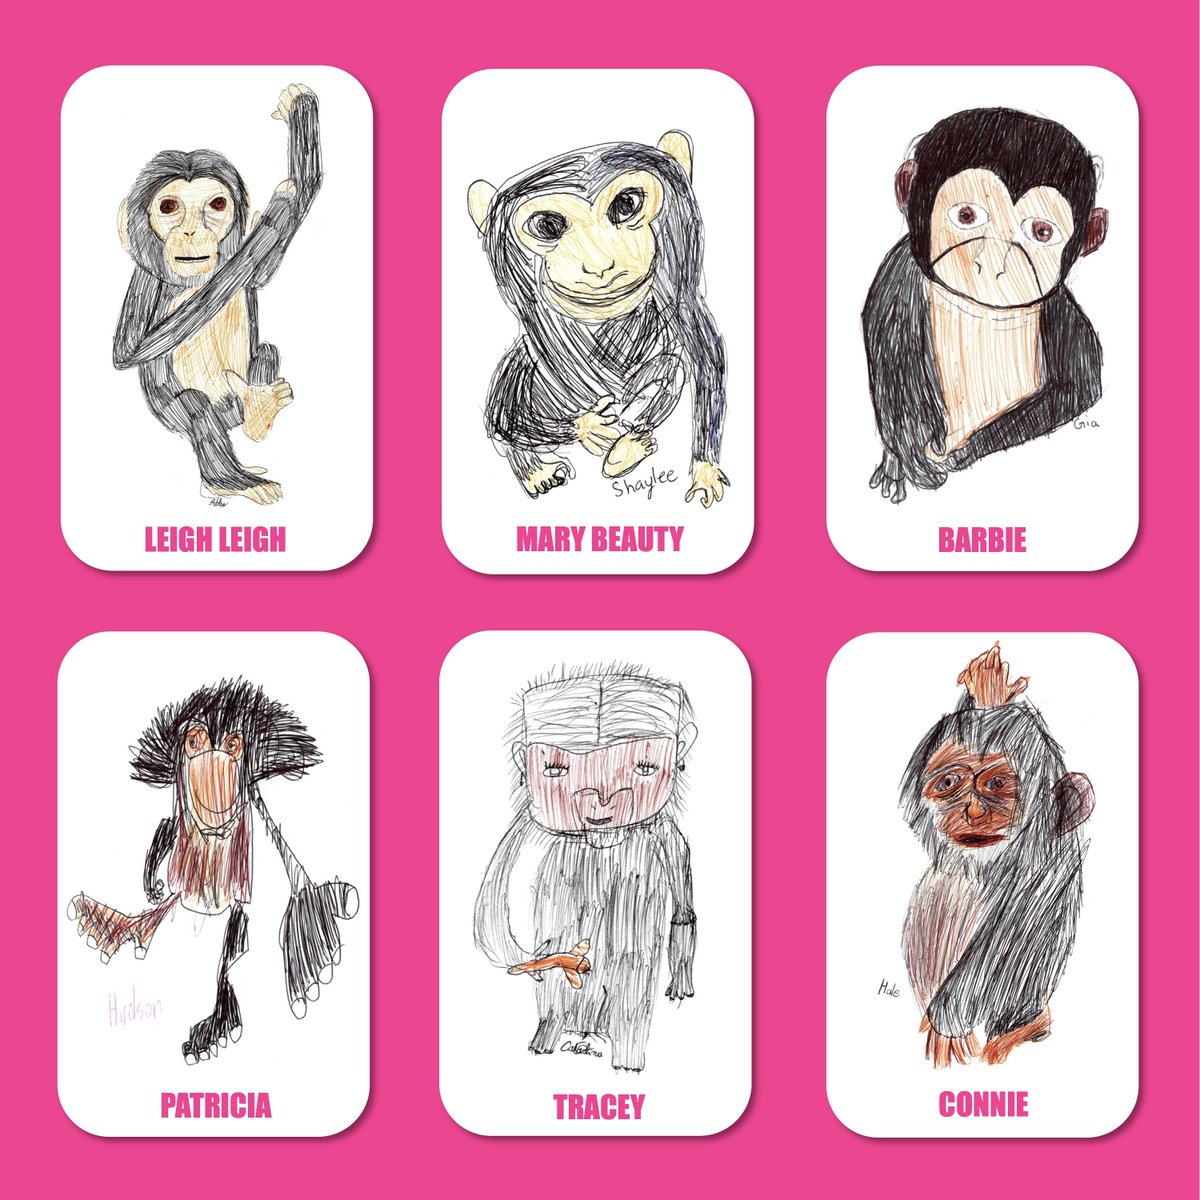 Joyous task this week - creating artworks for our Chimpanzee Community project with @BornFreeFDN & @liberiachimps featuring drawings of LCRP orphan chimps by USA & UK children. To LCRP's female stars chimp and non-chimp, you rock! Drawings by @LagunaBeachUSD children